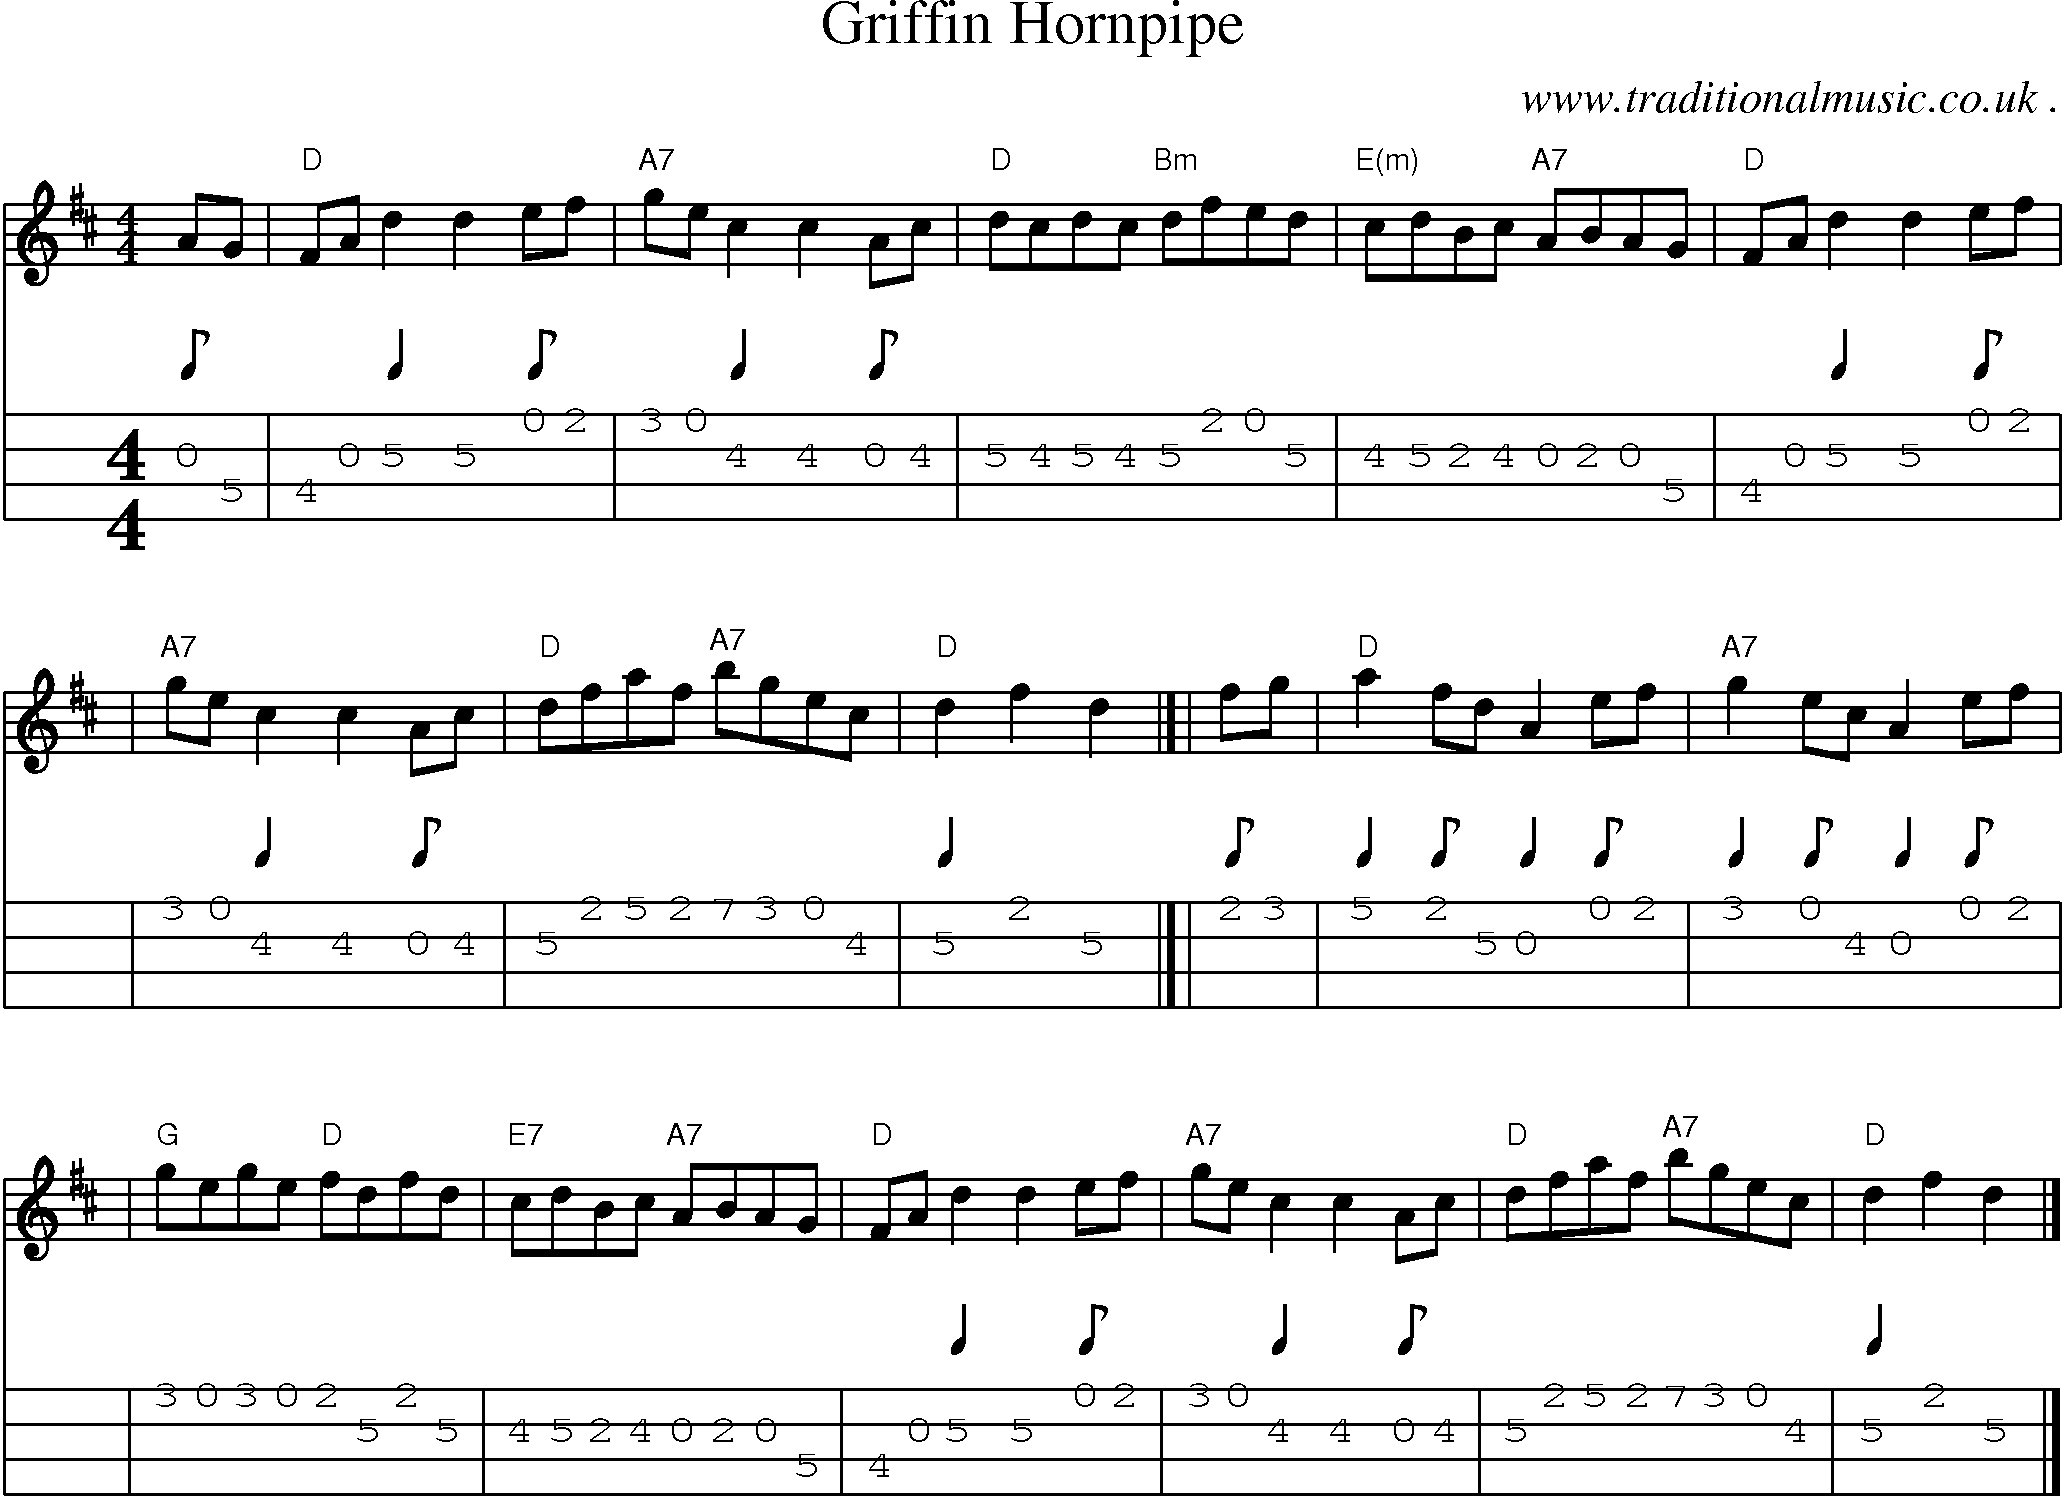 Sheet-music  score, Chords and Mandolin Tabs for Griffin Hornpipe